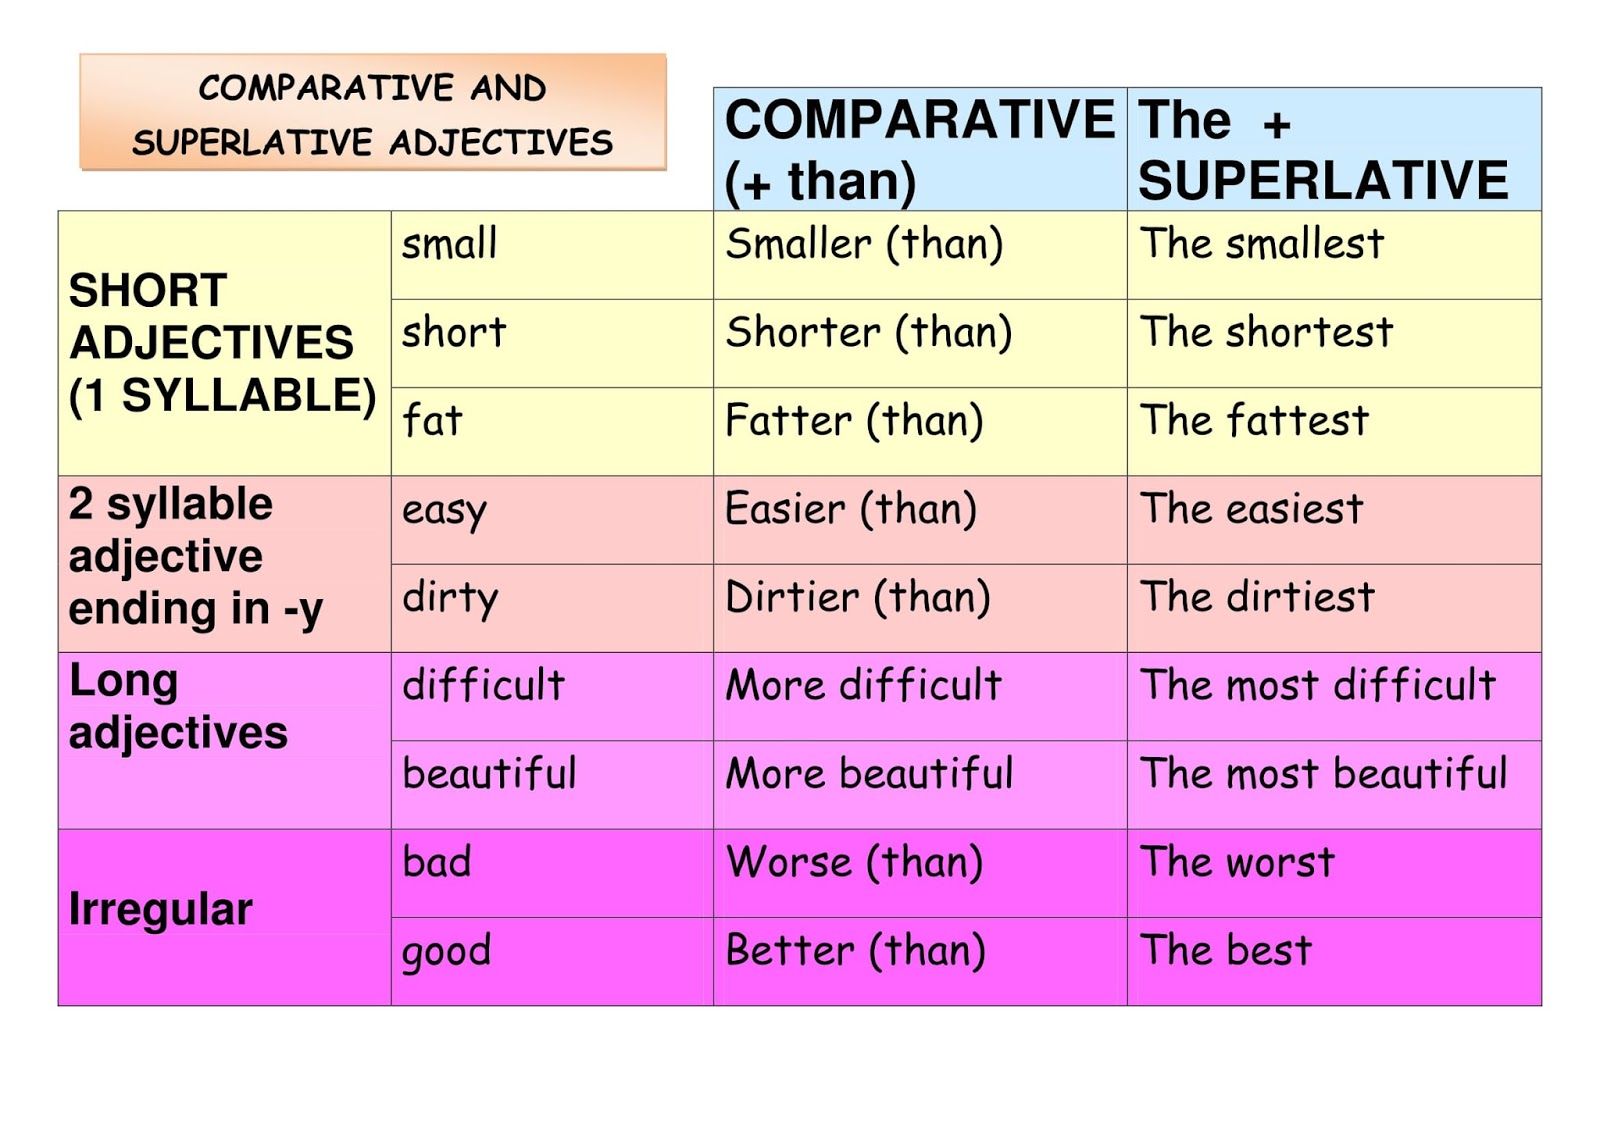 Adjectives rules. Superlative adjectives правило. Таблица Comparative and Superlative. Comparative and Superlative forms of adjectives. Comparative and Superlative adjectives правило.